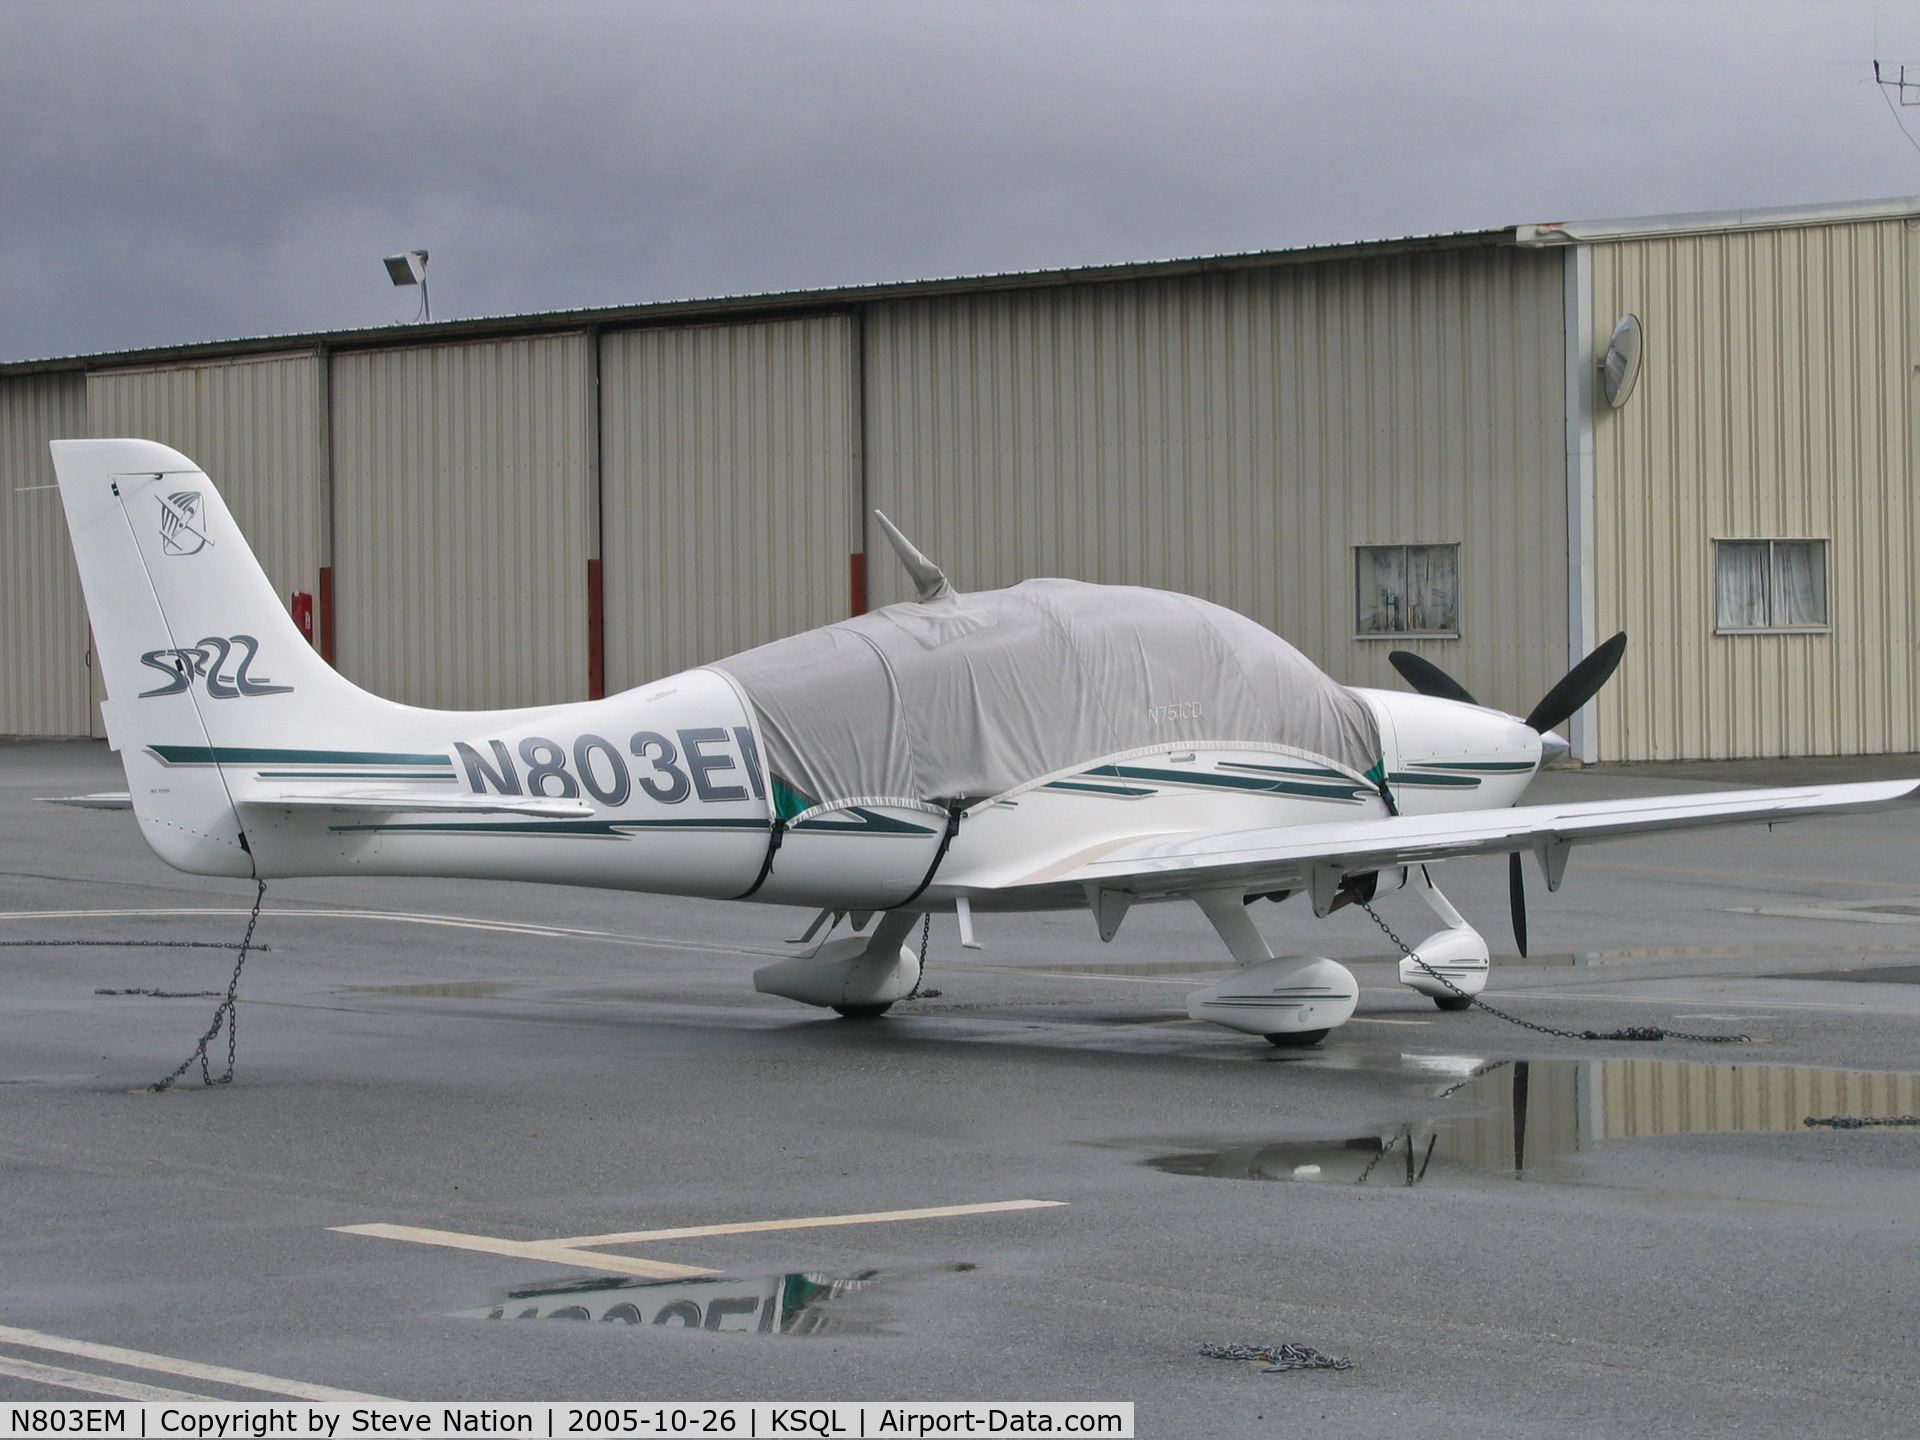 N803EM, 2003 Cirrus SR22 C/N 0457, 2003 Cirrus Design SR22 buttoned up for rain @ San Carlos, CA home base (sold to owner in Iowa in May 2007)